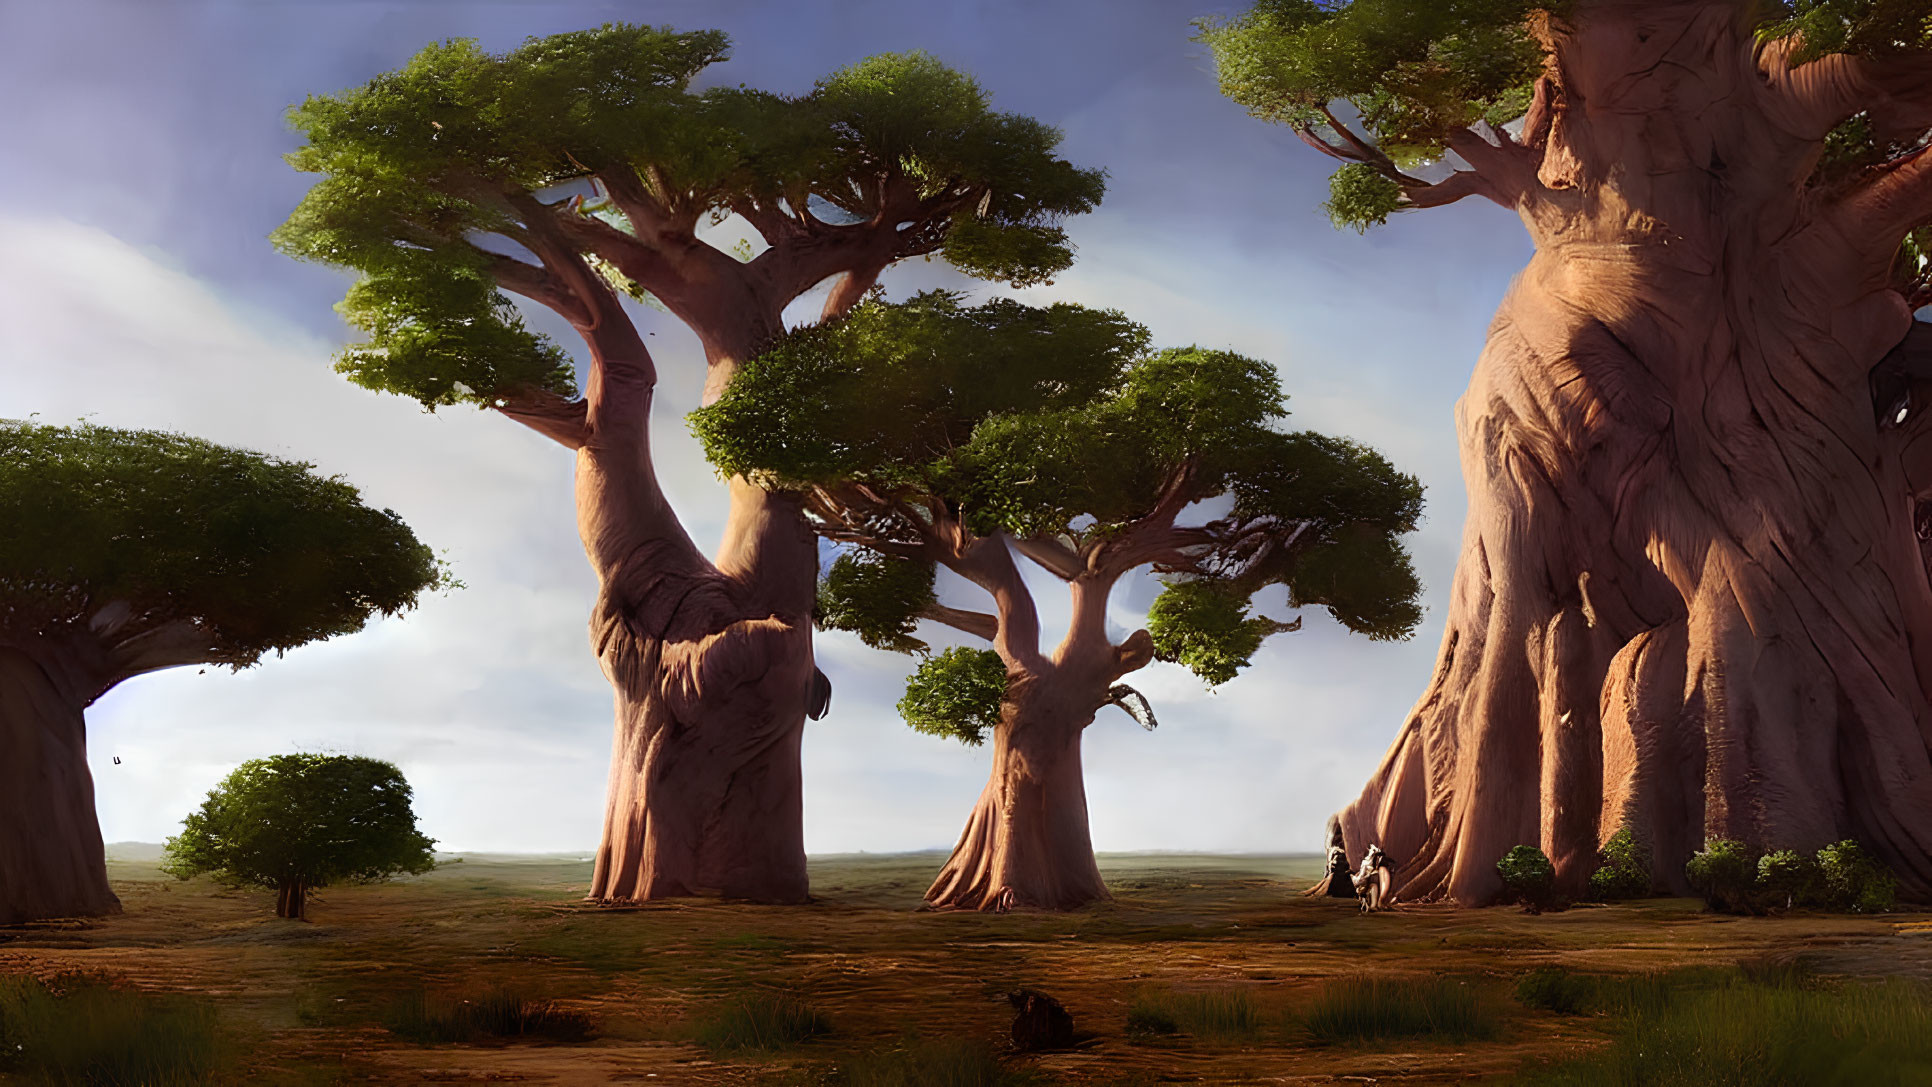 Serene landscape with large baobab trees and lush canopies